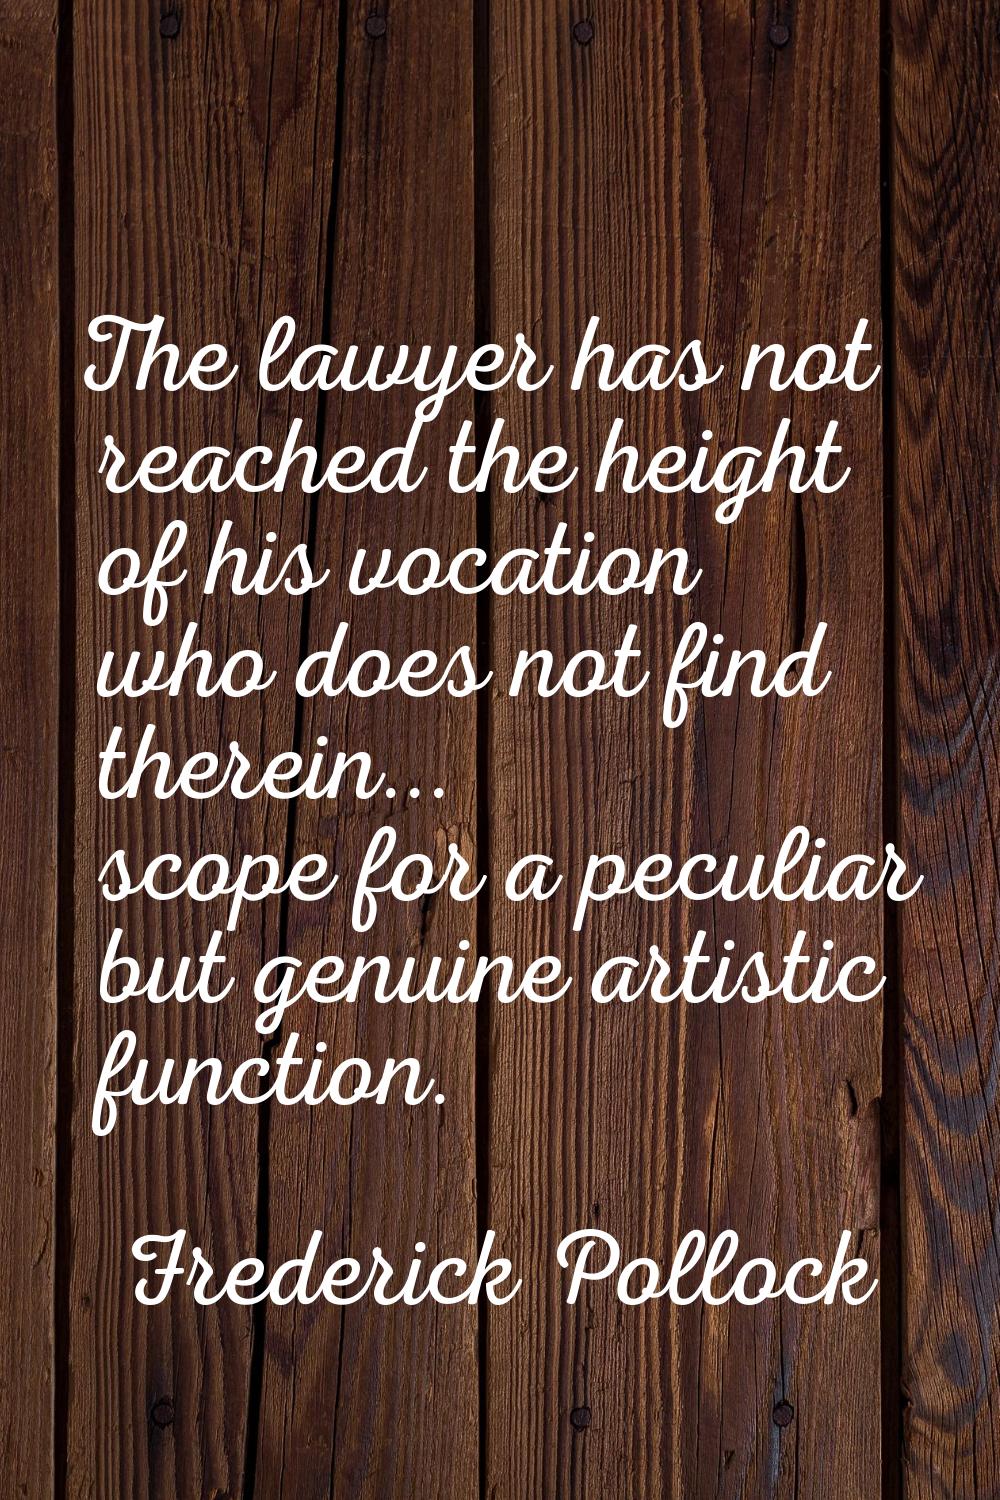 The lawyer has not reached the height of his vocation who does not find therein... scope for a pecu